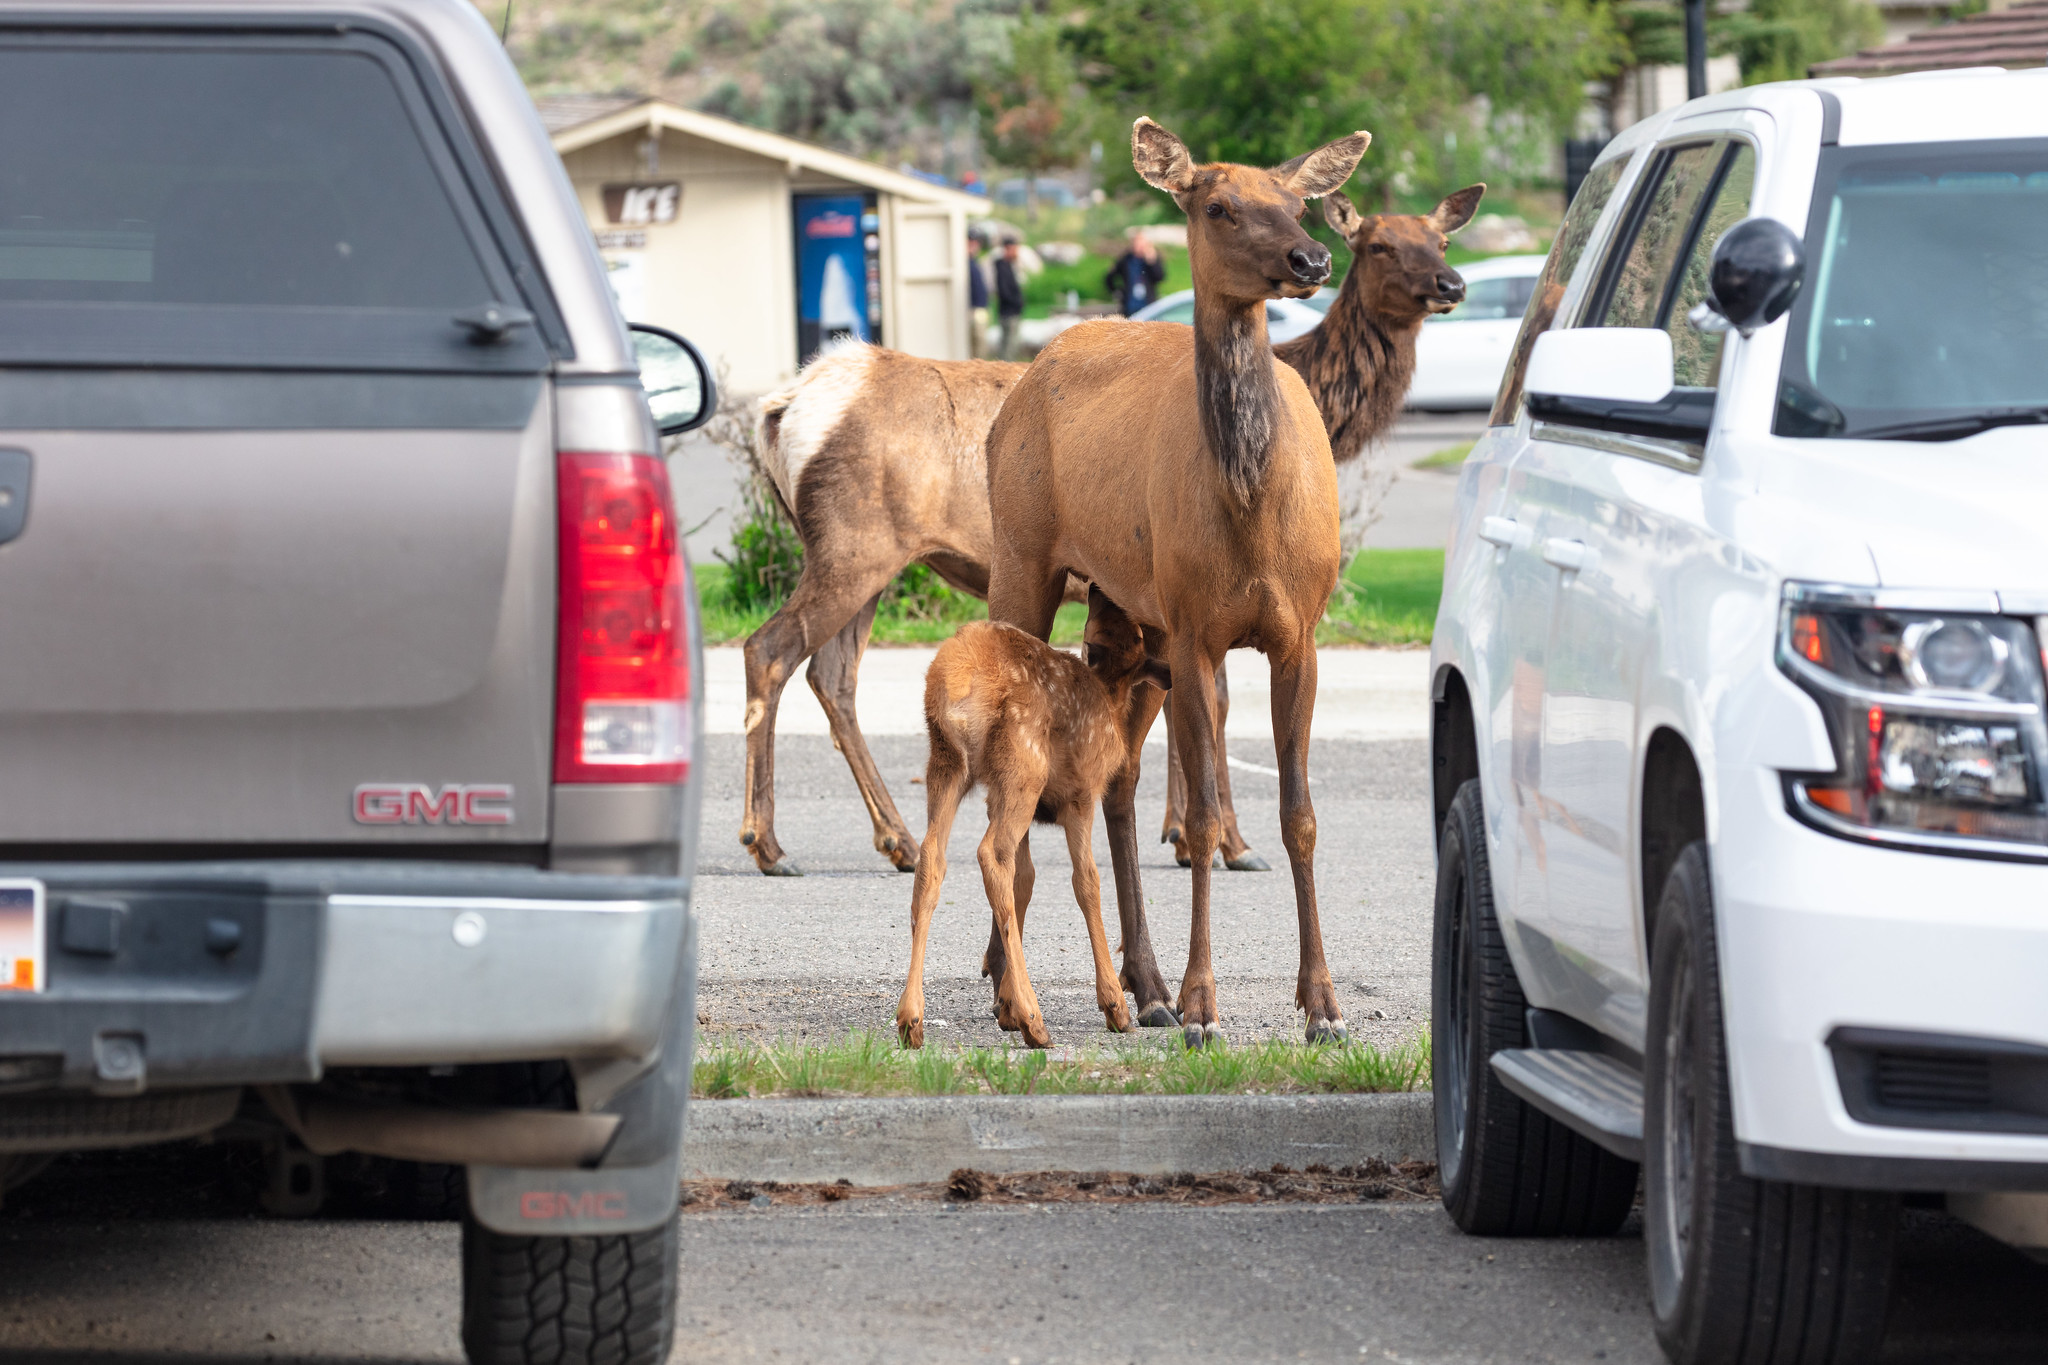 Mother elk with car in between cars in parking lot